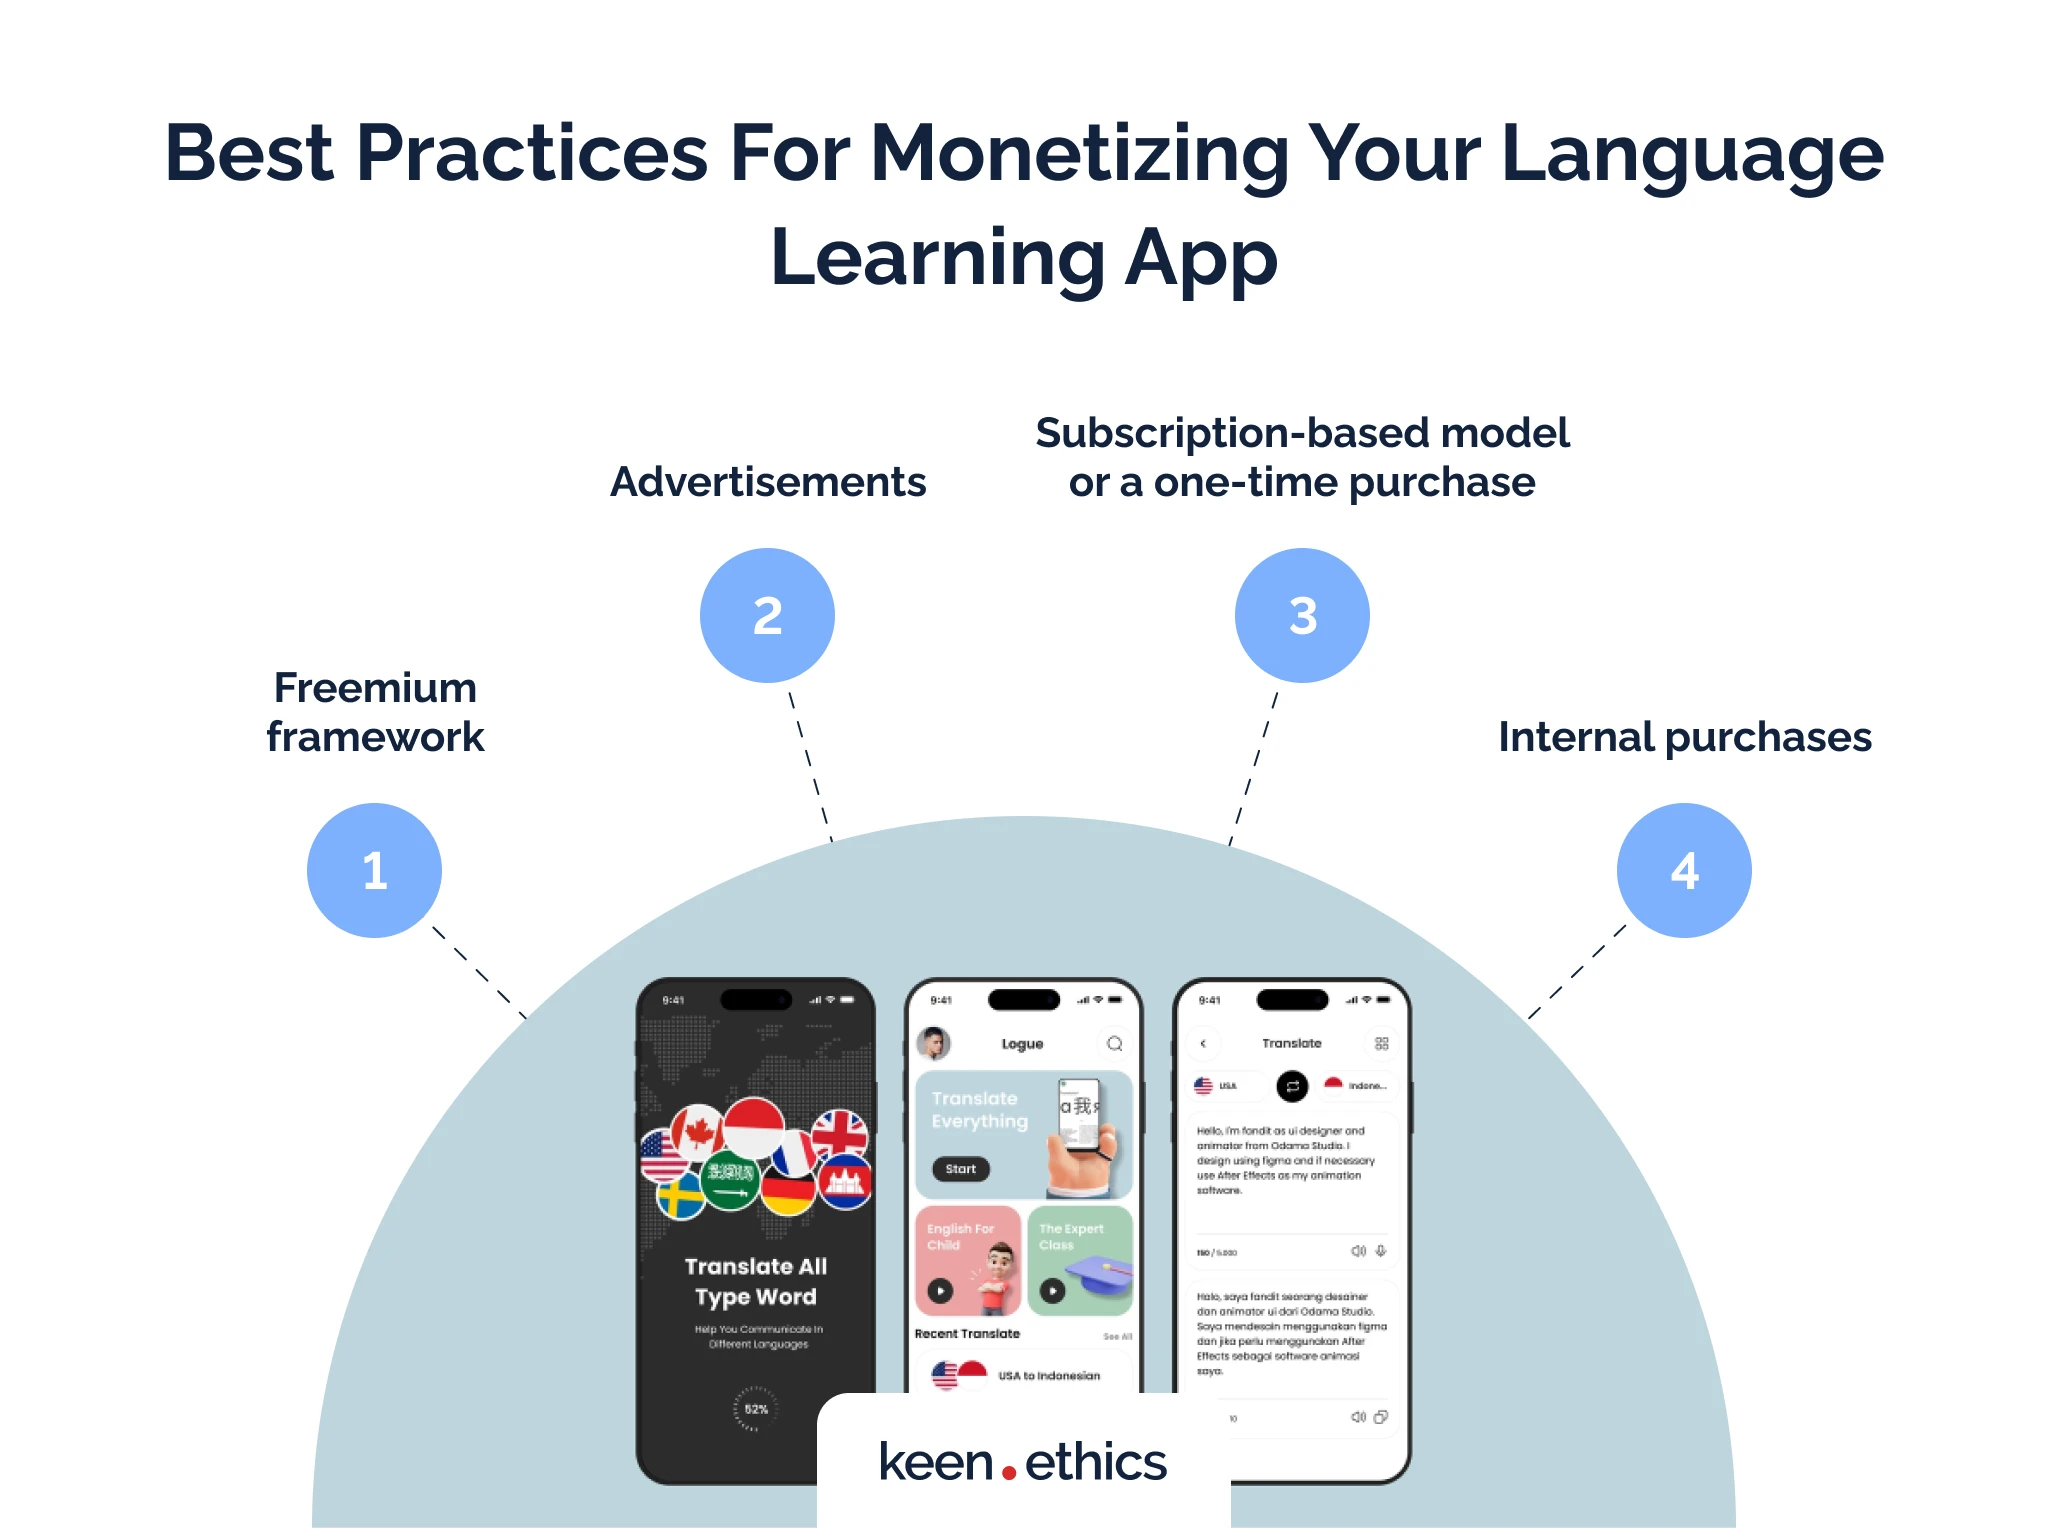 Best practices for monetizing your language learning app